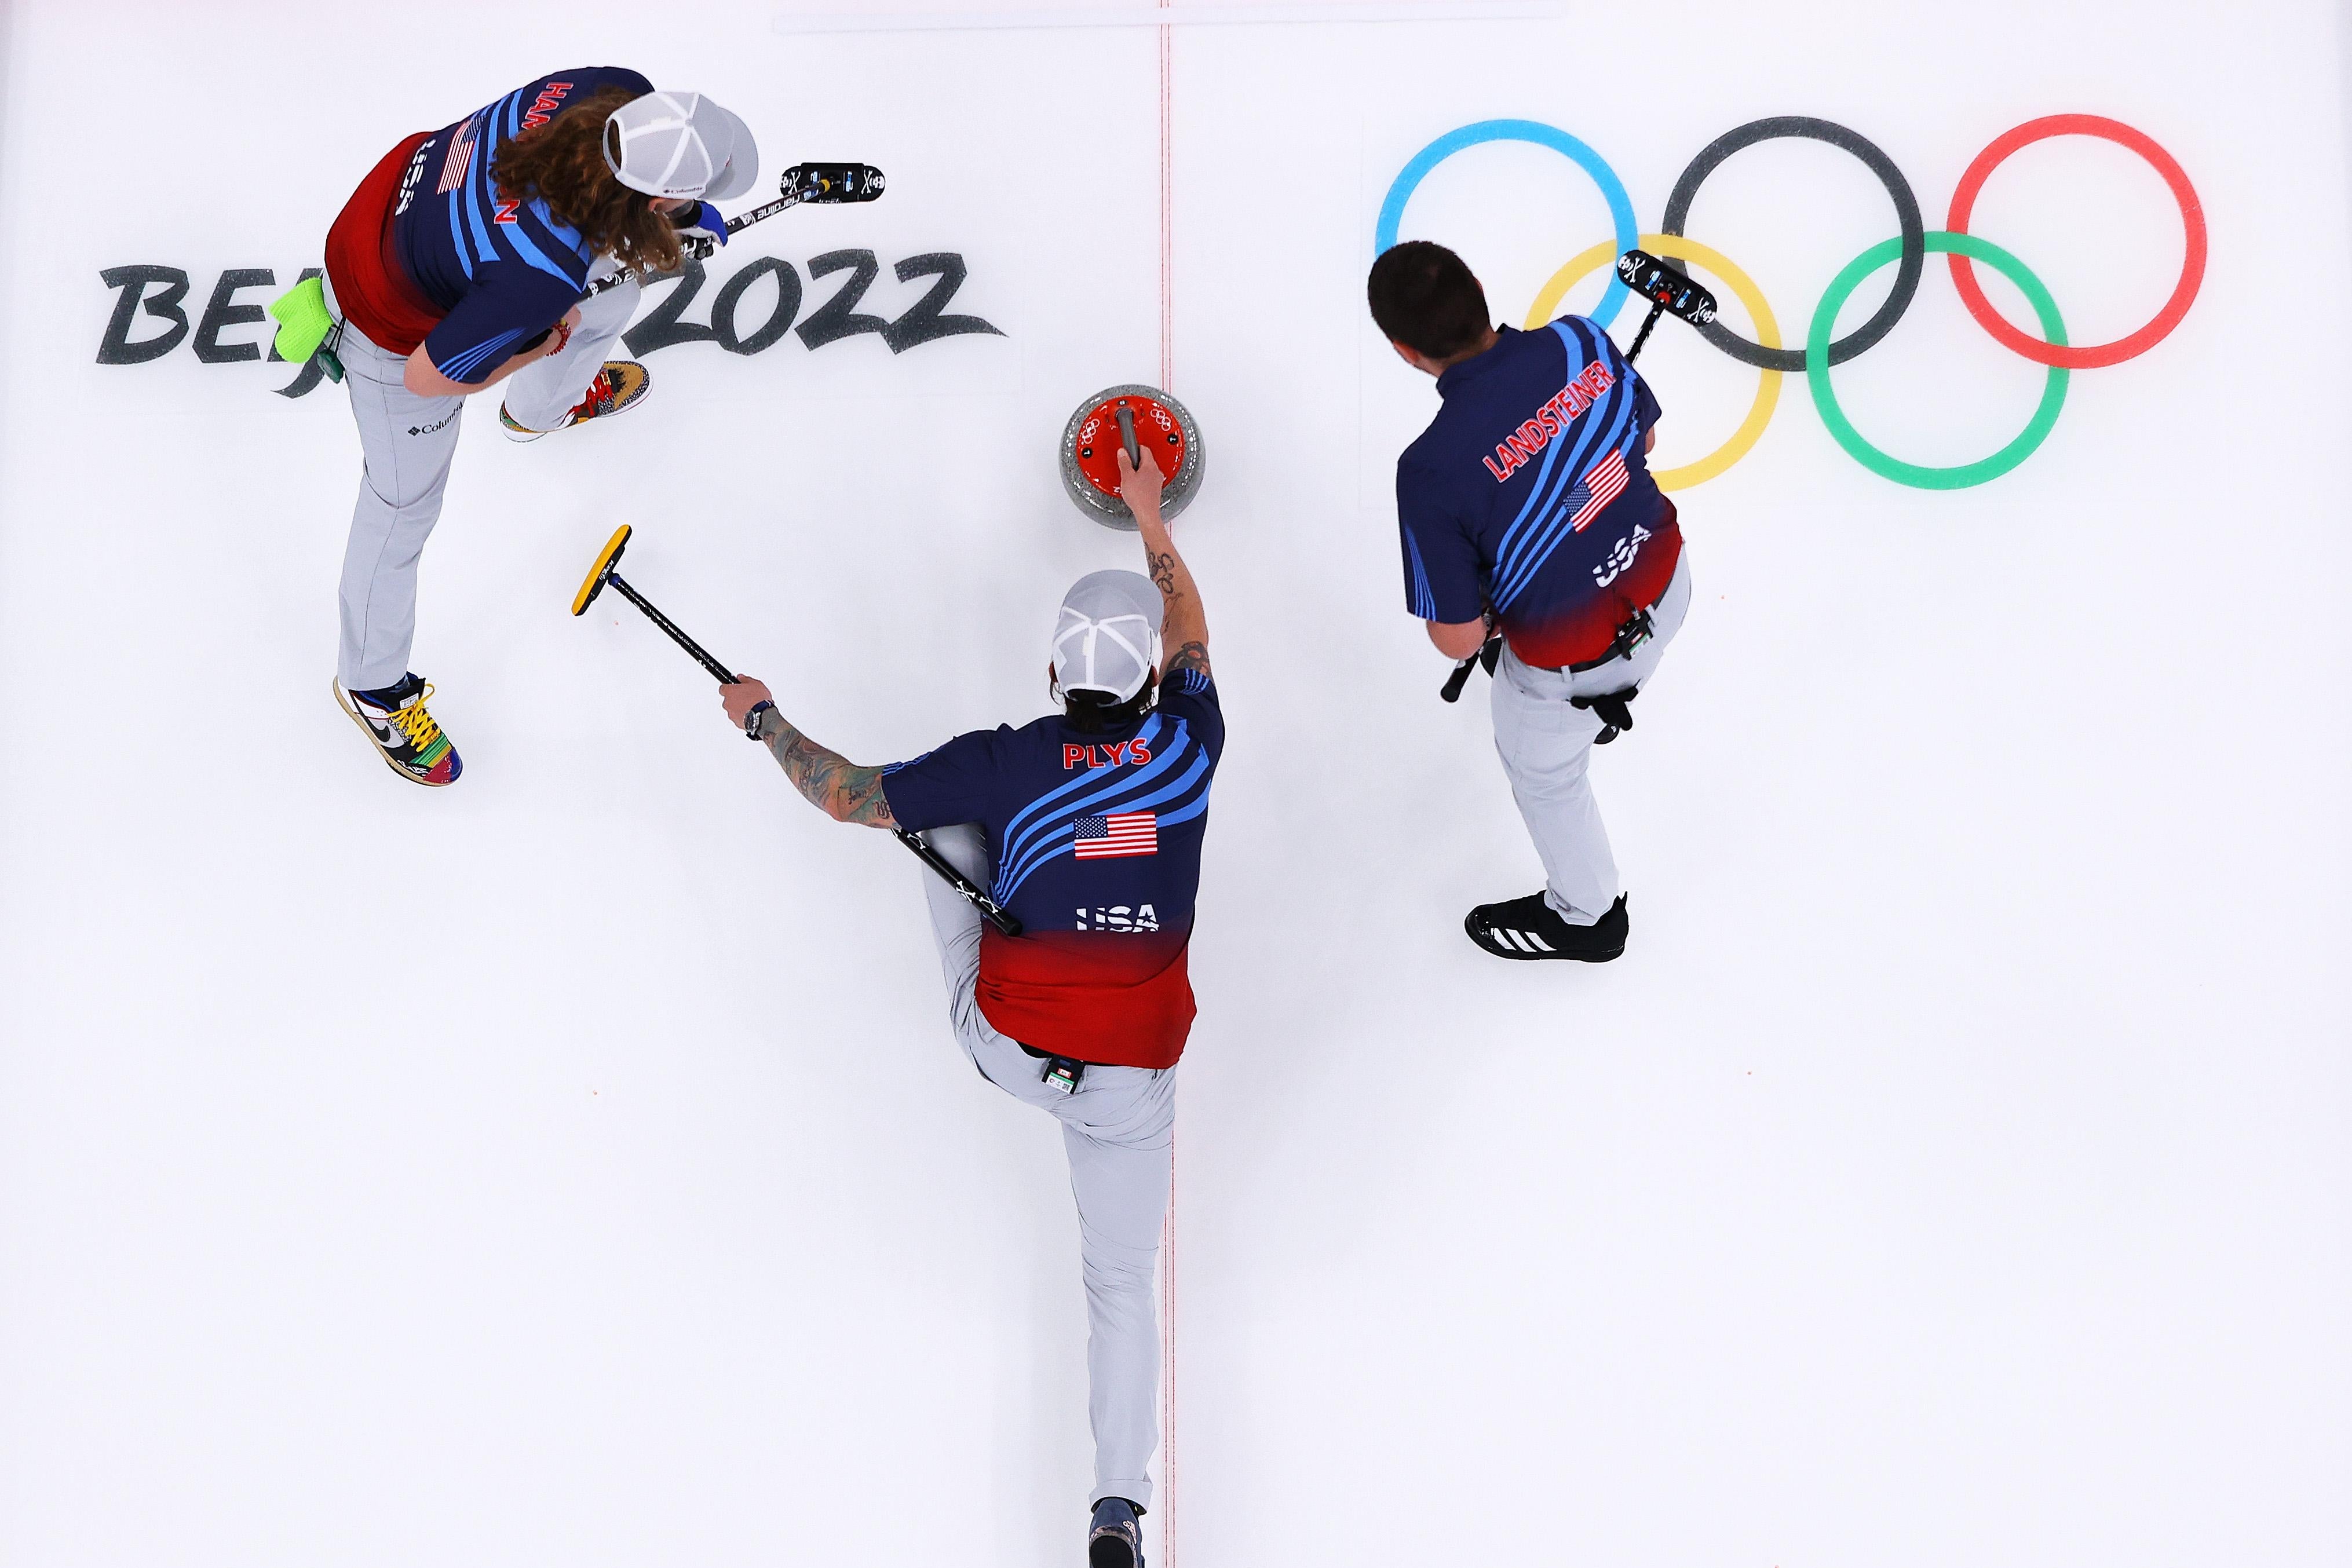 Three dudes in USA uniforms curling, the middle guy pushing to rock and the others brooming away, seen from above, with Olympics rings and Beijing 2022 logos on the ice